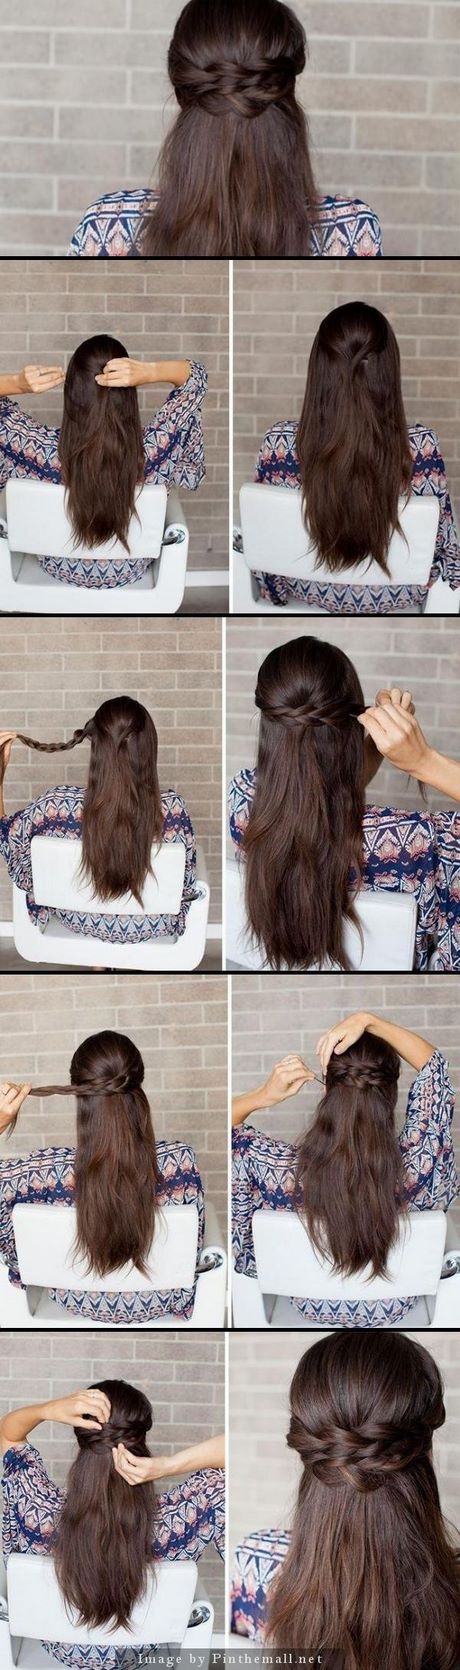 easy-hairstyles-with-hair-down-06_6 Easy hairstyles with hair down